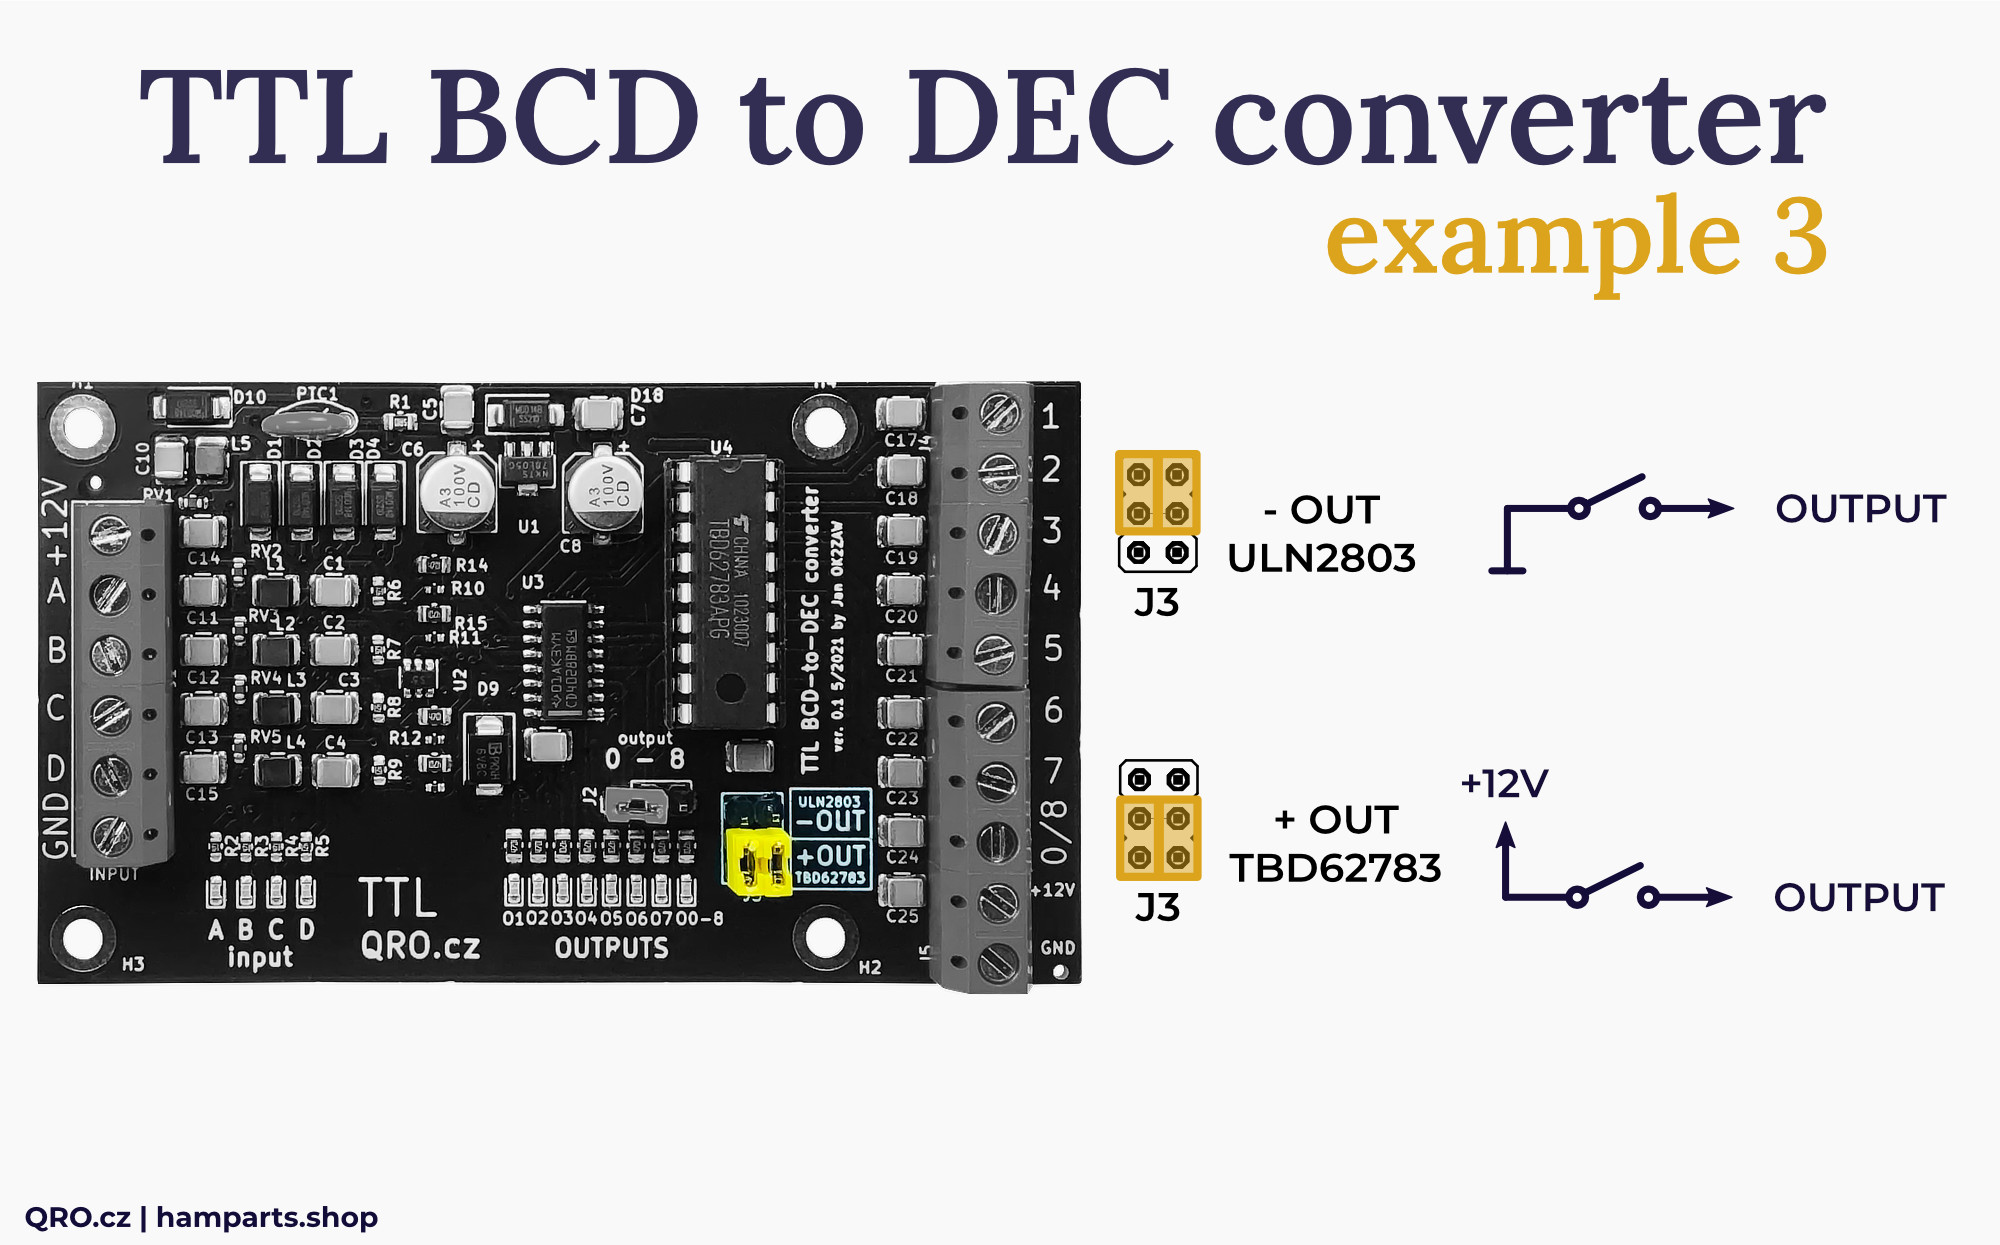 BCD to DEC TTL version converter switch example by qro.cz hamparts.shop